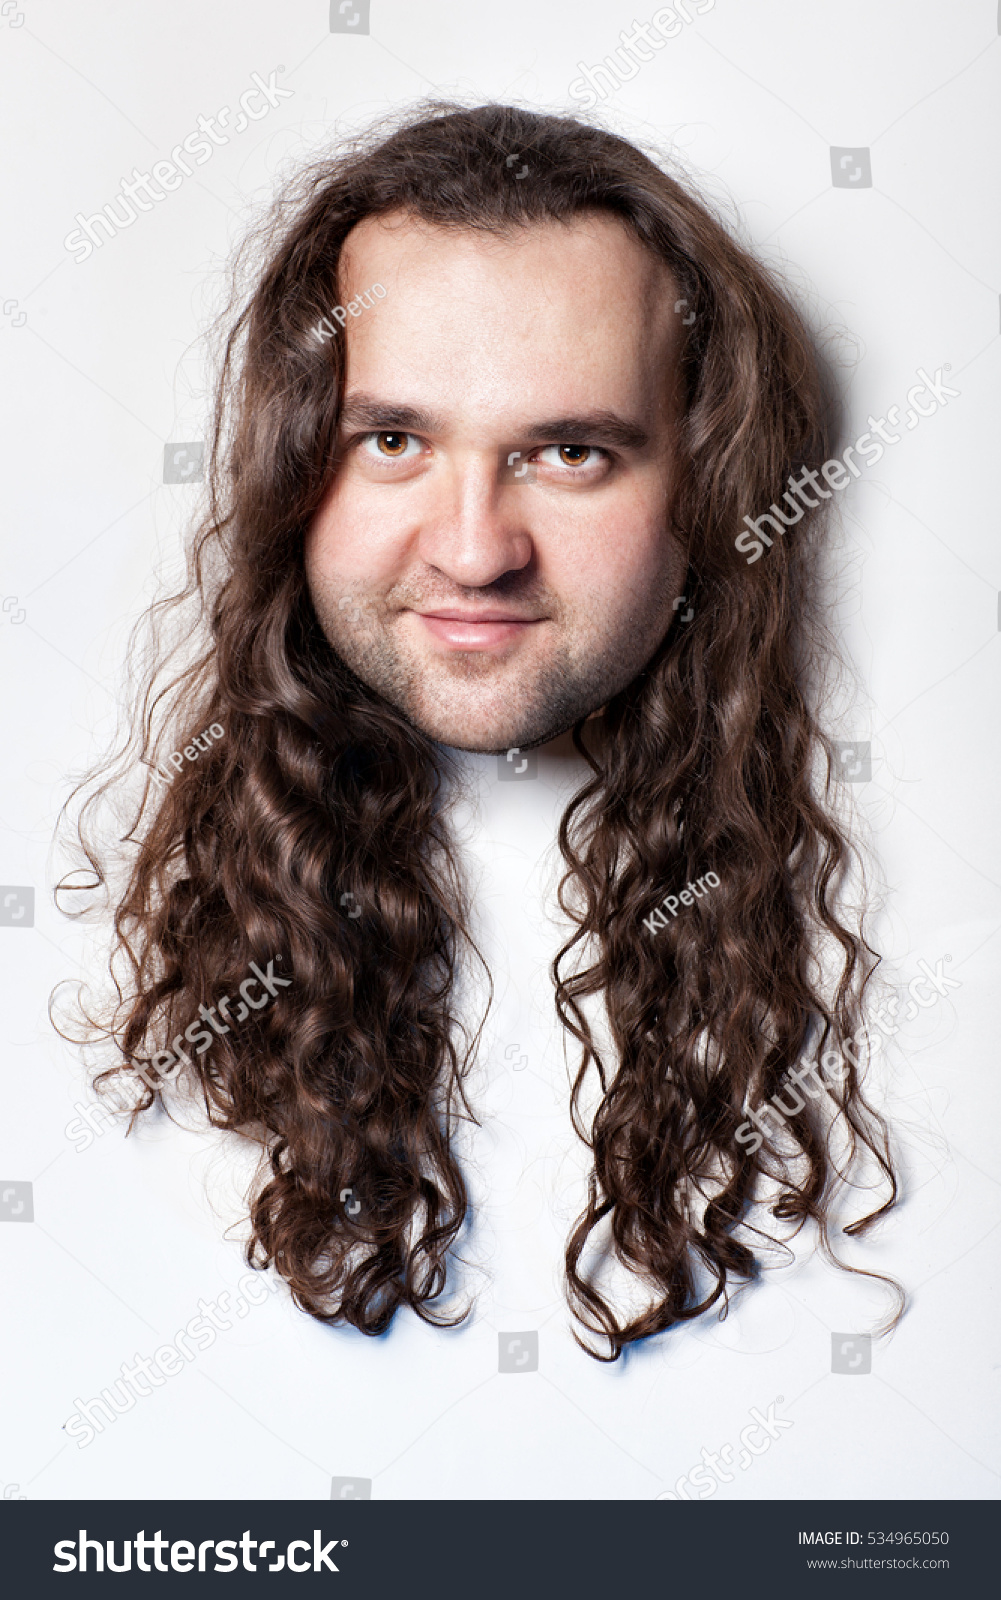 Funny Mens Head Hair Long Curly Stock Photo Edit Now 534965050